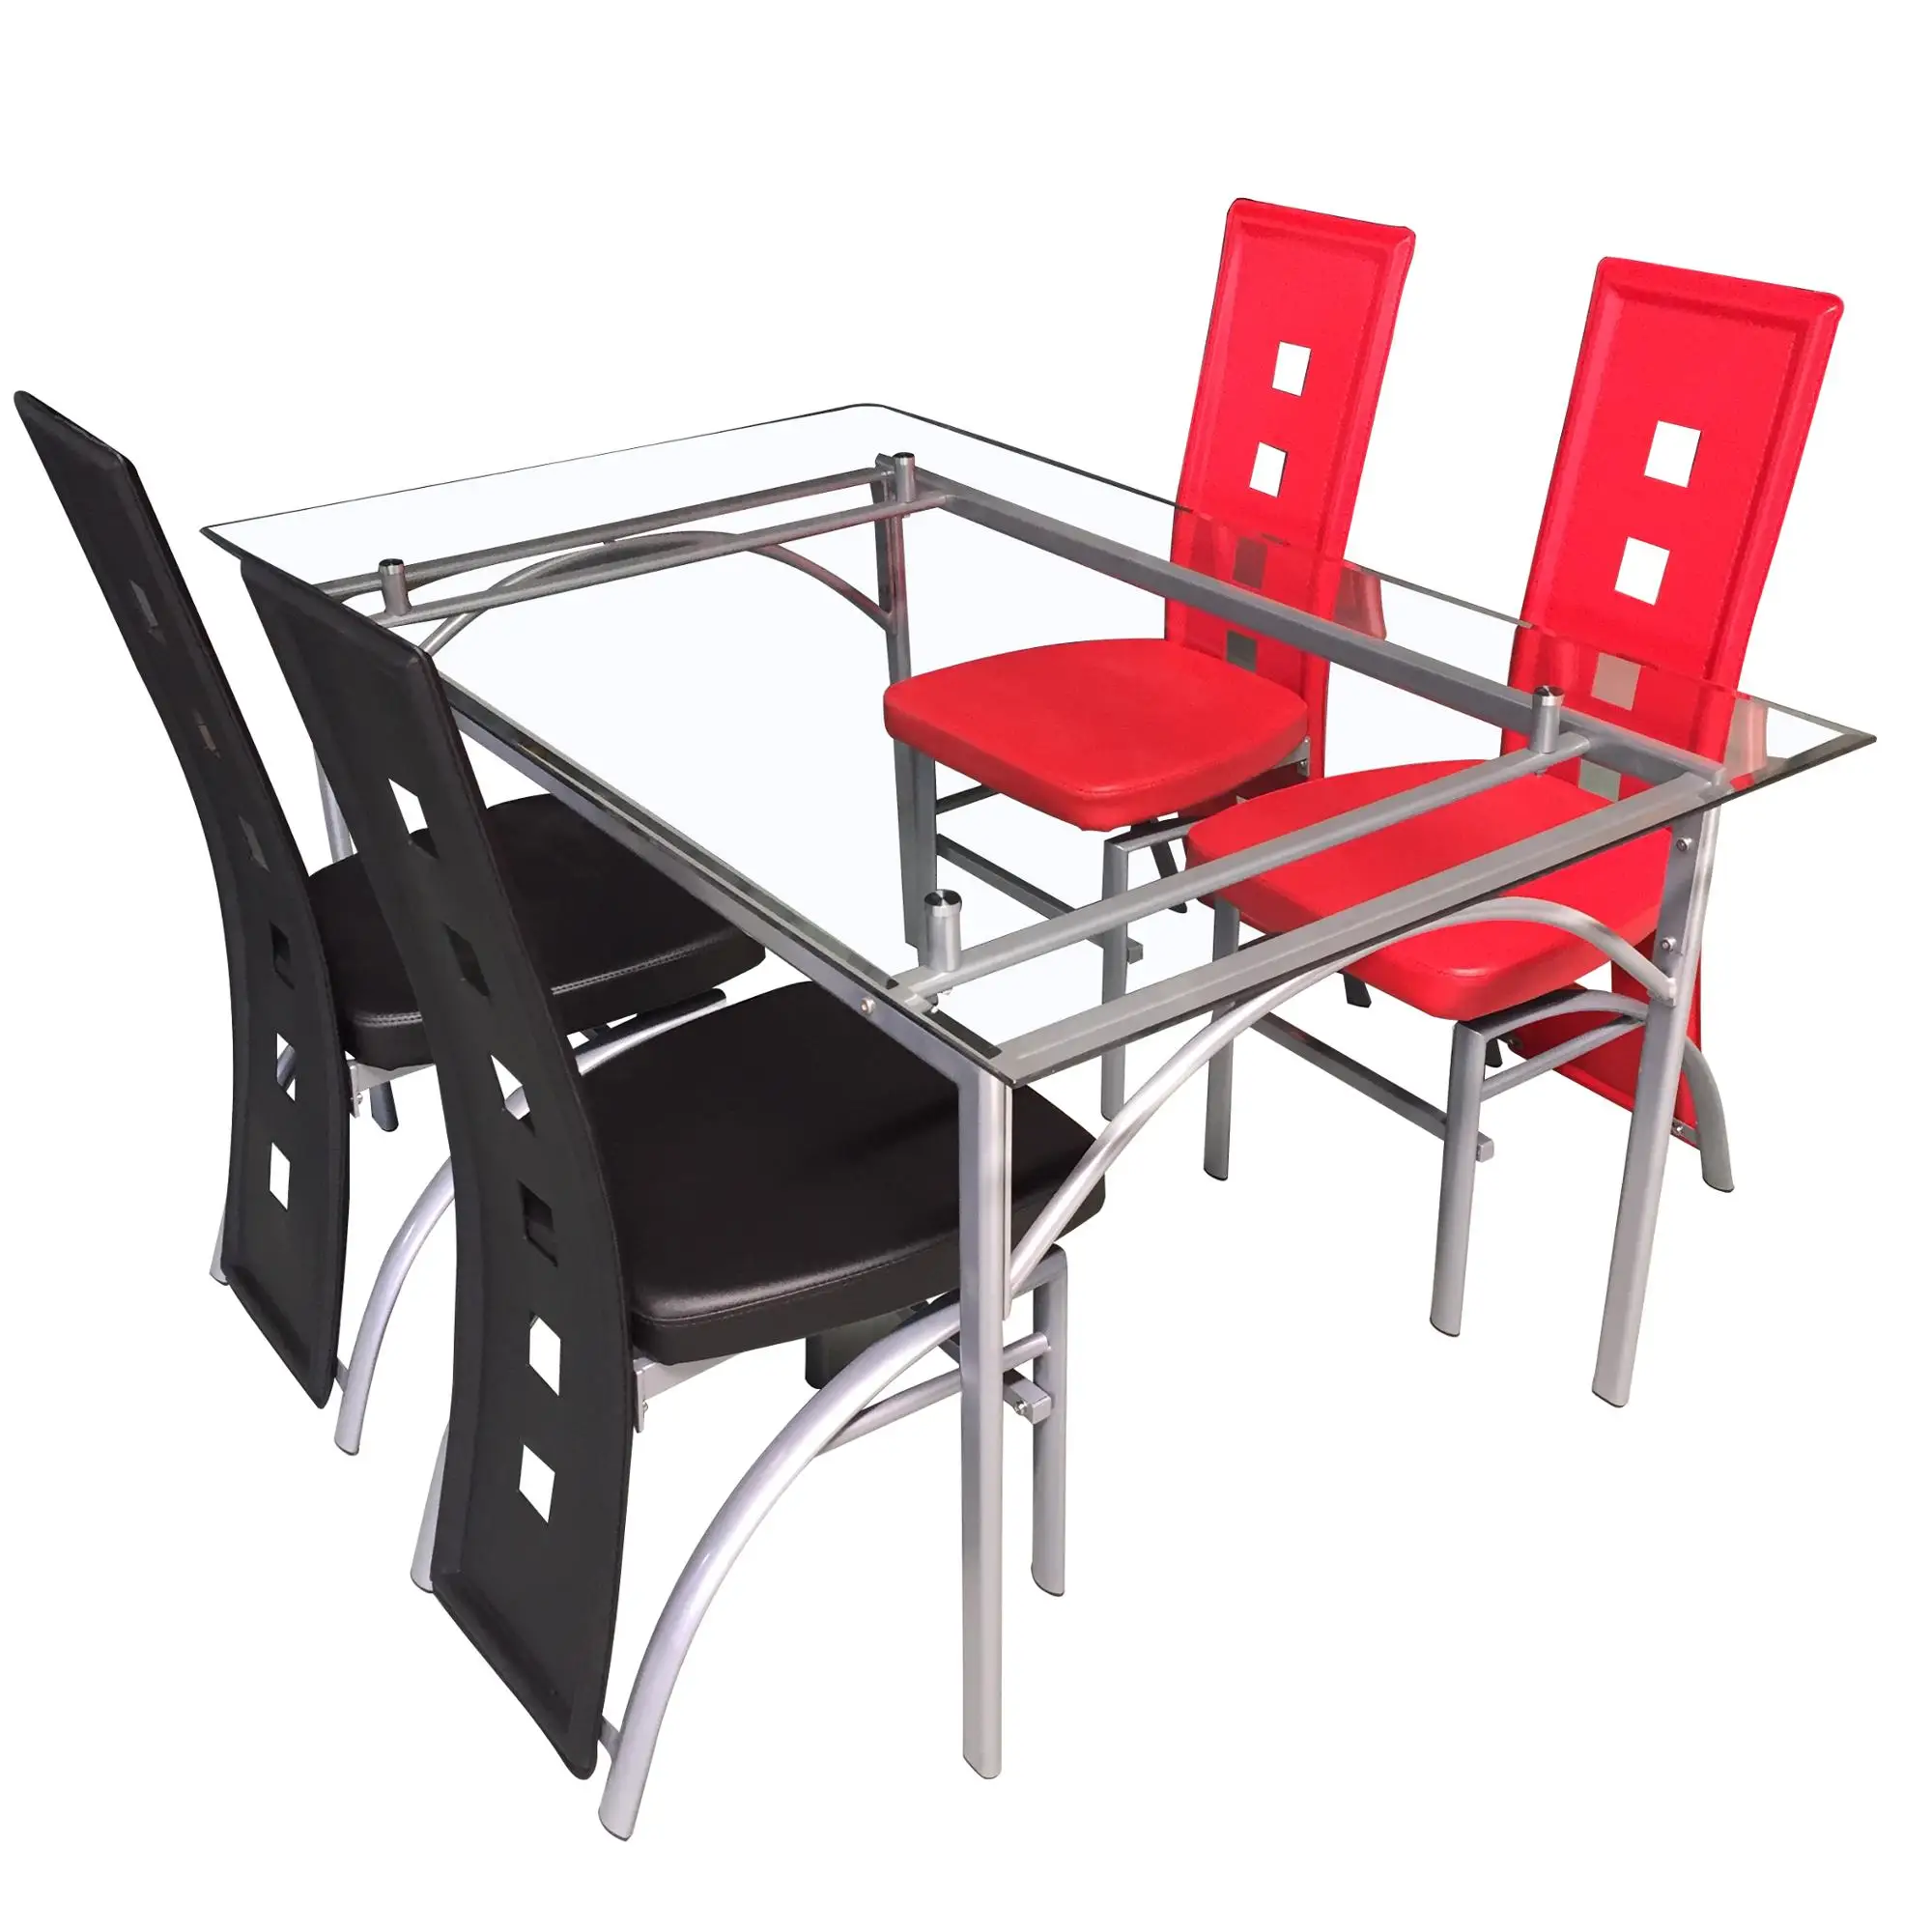 cheap dining room furniture glass dining table set with chairs  buy dining  table setrestaurant table chairtable chair product on alibaba